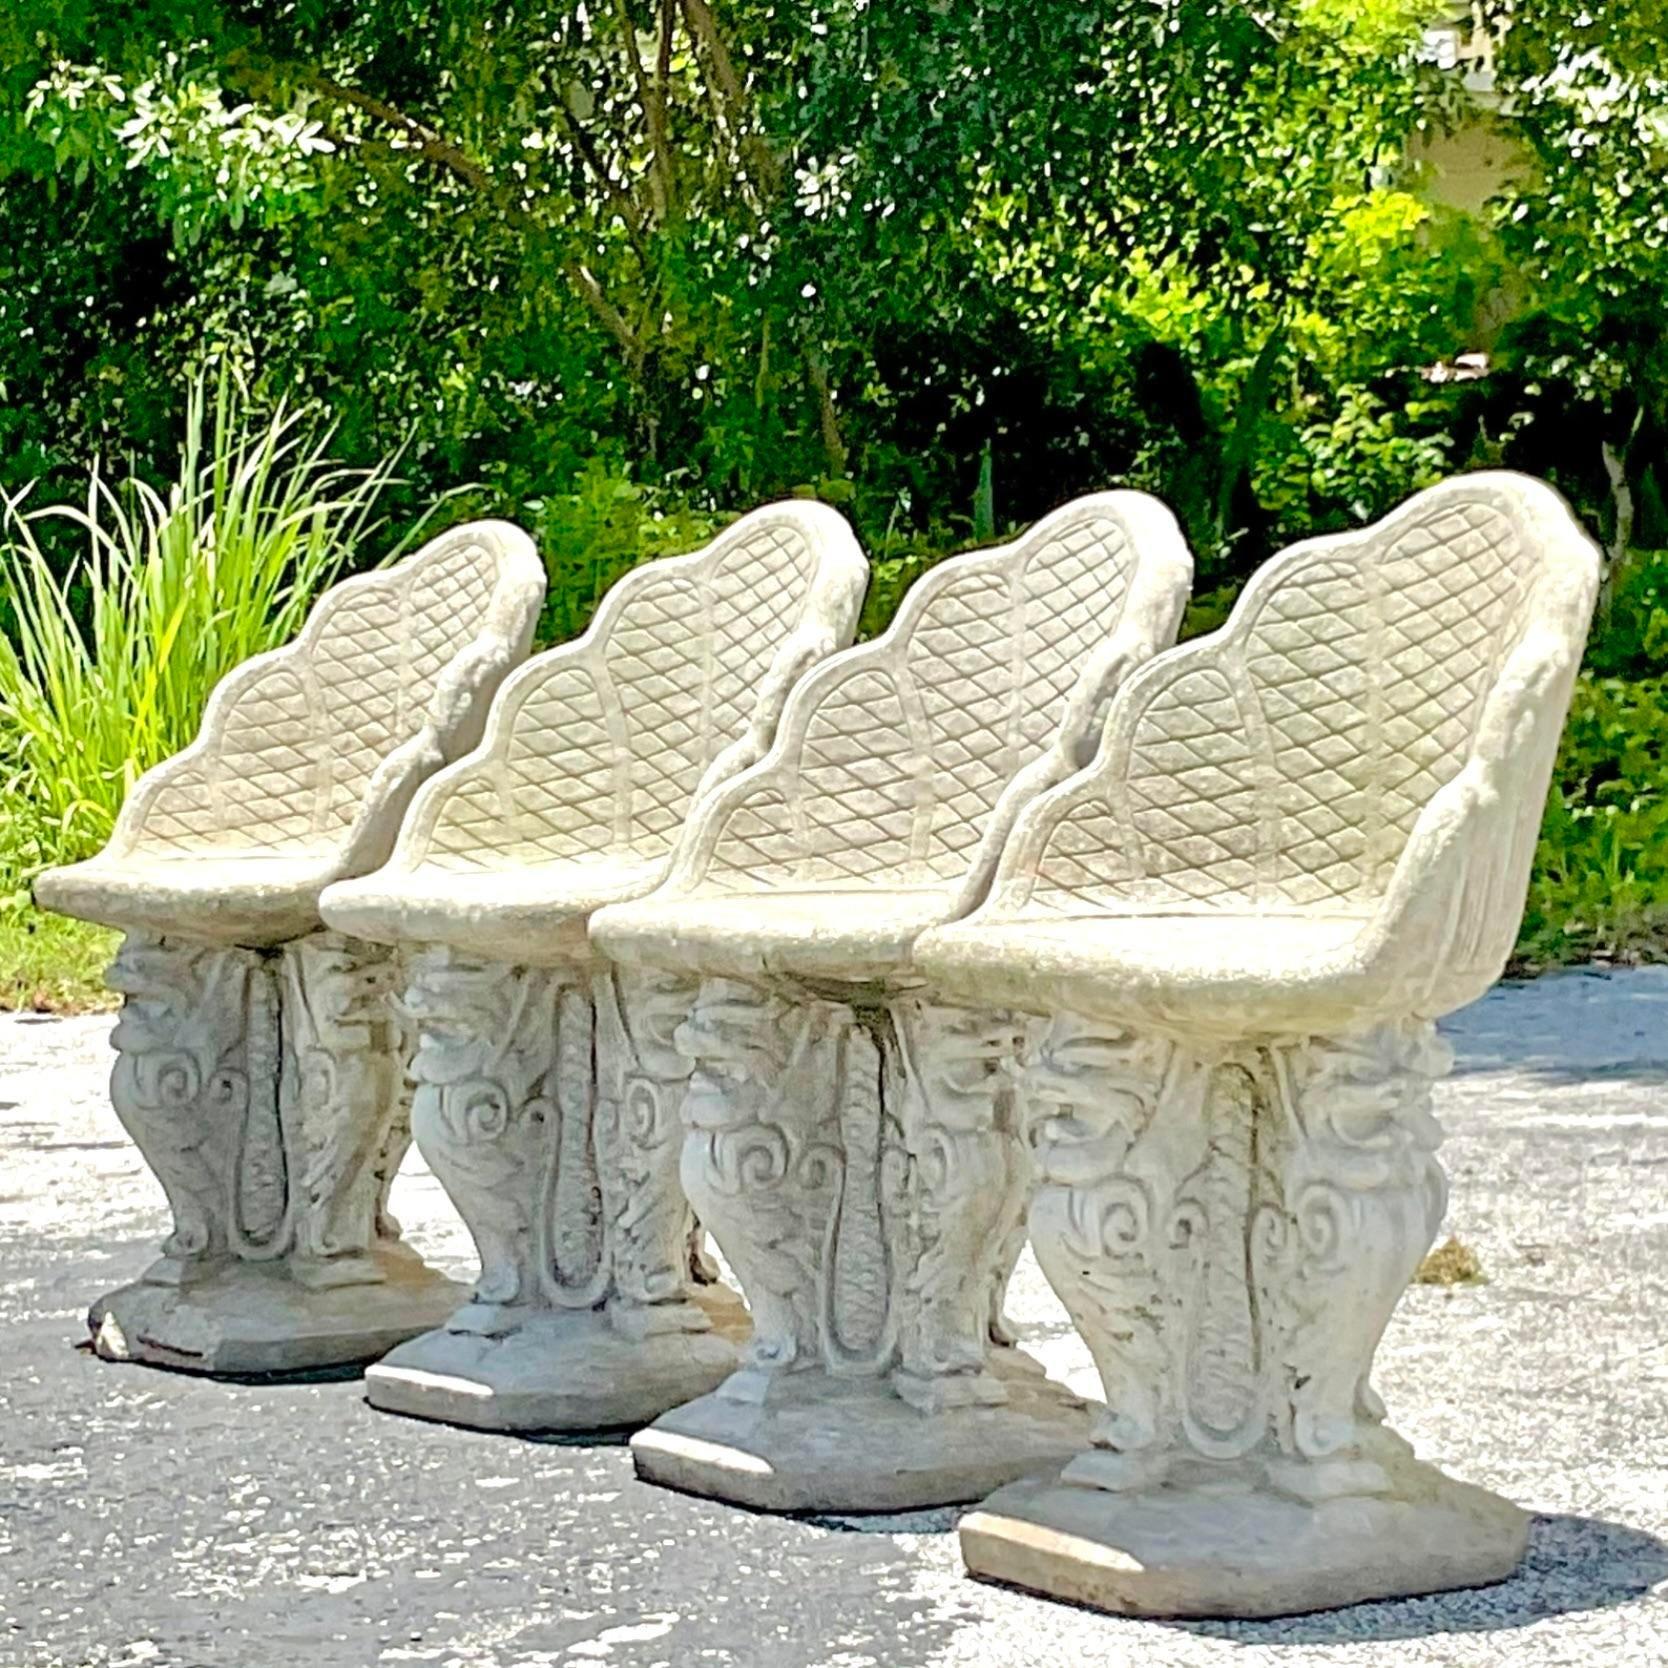 A fantastic set of four vintage Coastal dining chairs. The iconic Grotto style with serpent pedestals. Acquired from a Palm Beach estate